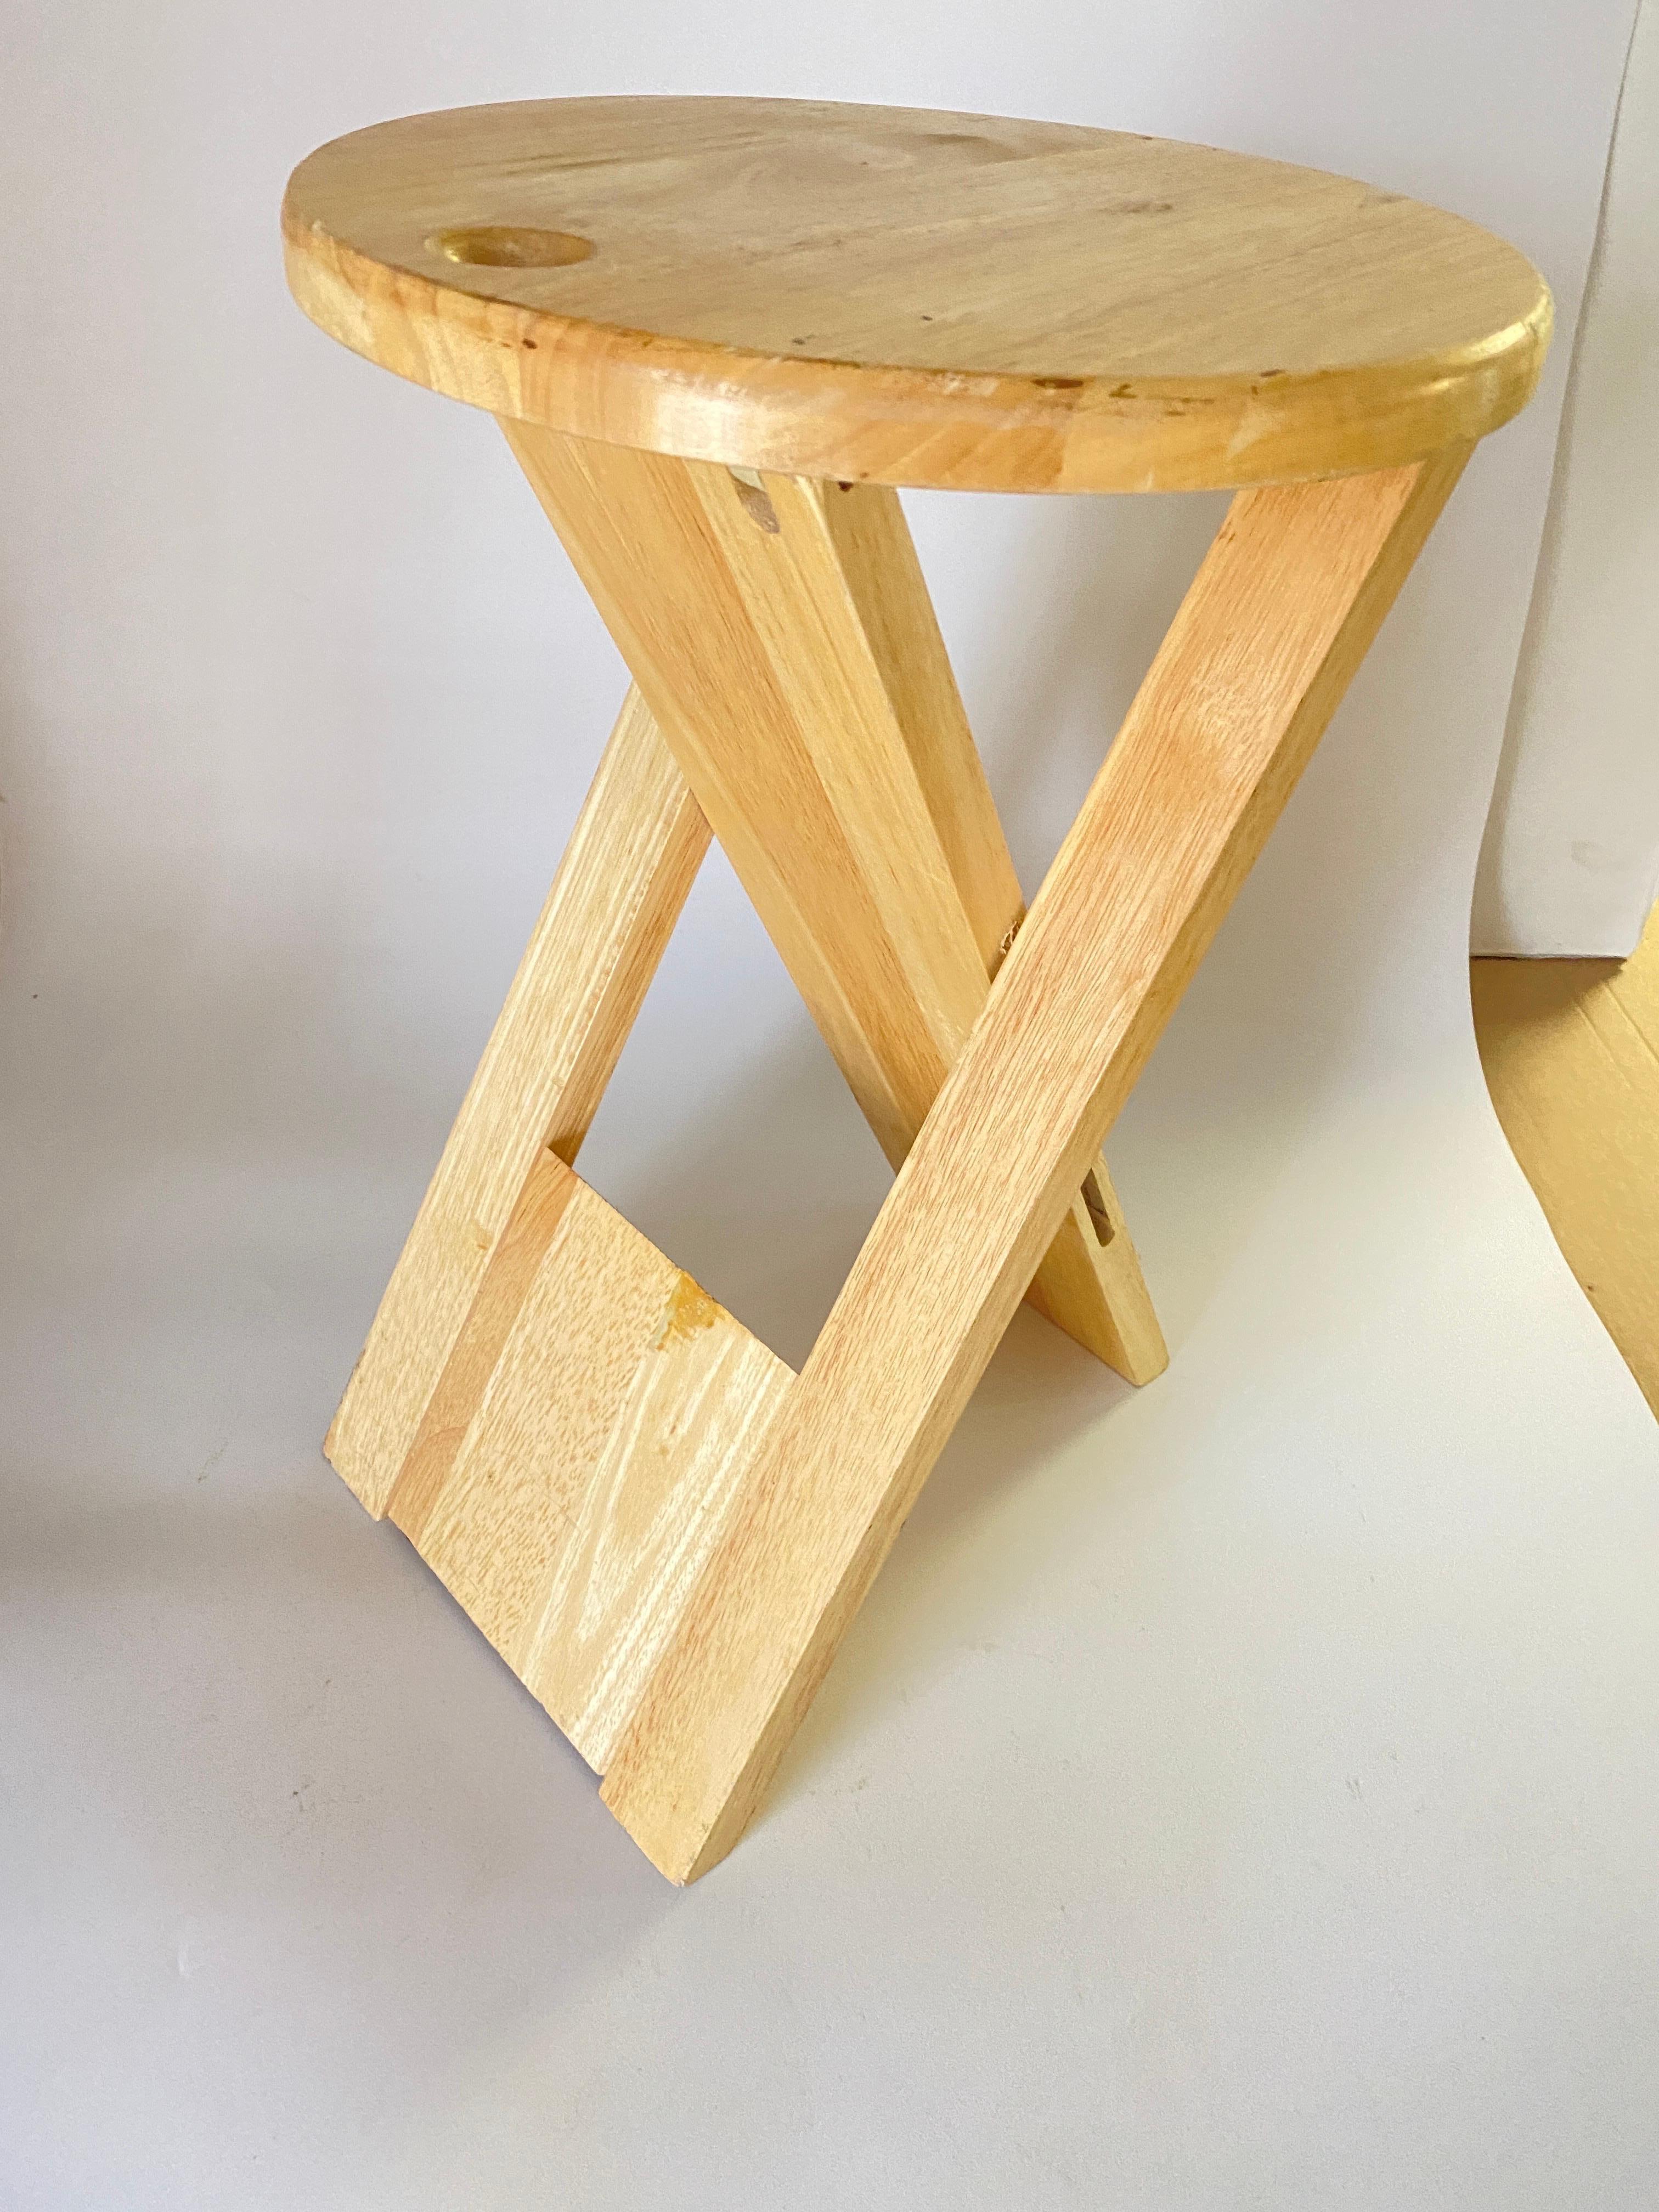 Folded Stool in Wood, Brown Color, by Adrian Reed, France, 1970 In Good Condition For Sale In Auribeau sur Siagne, FR